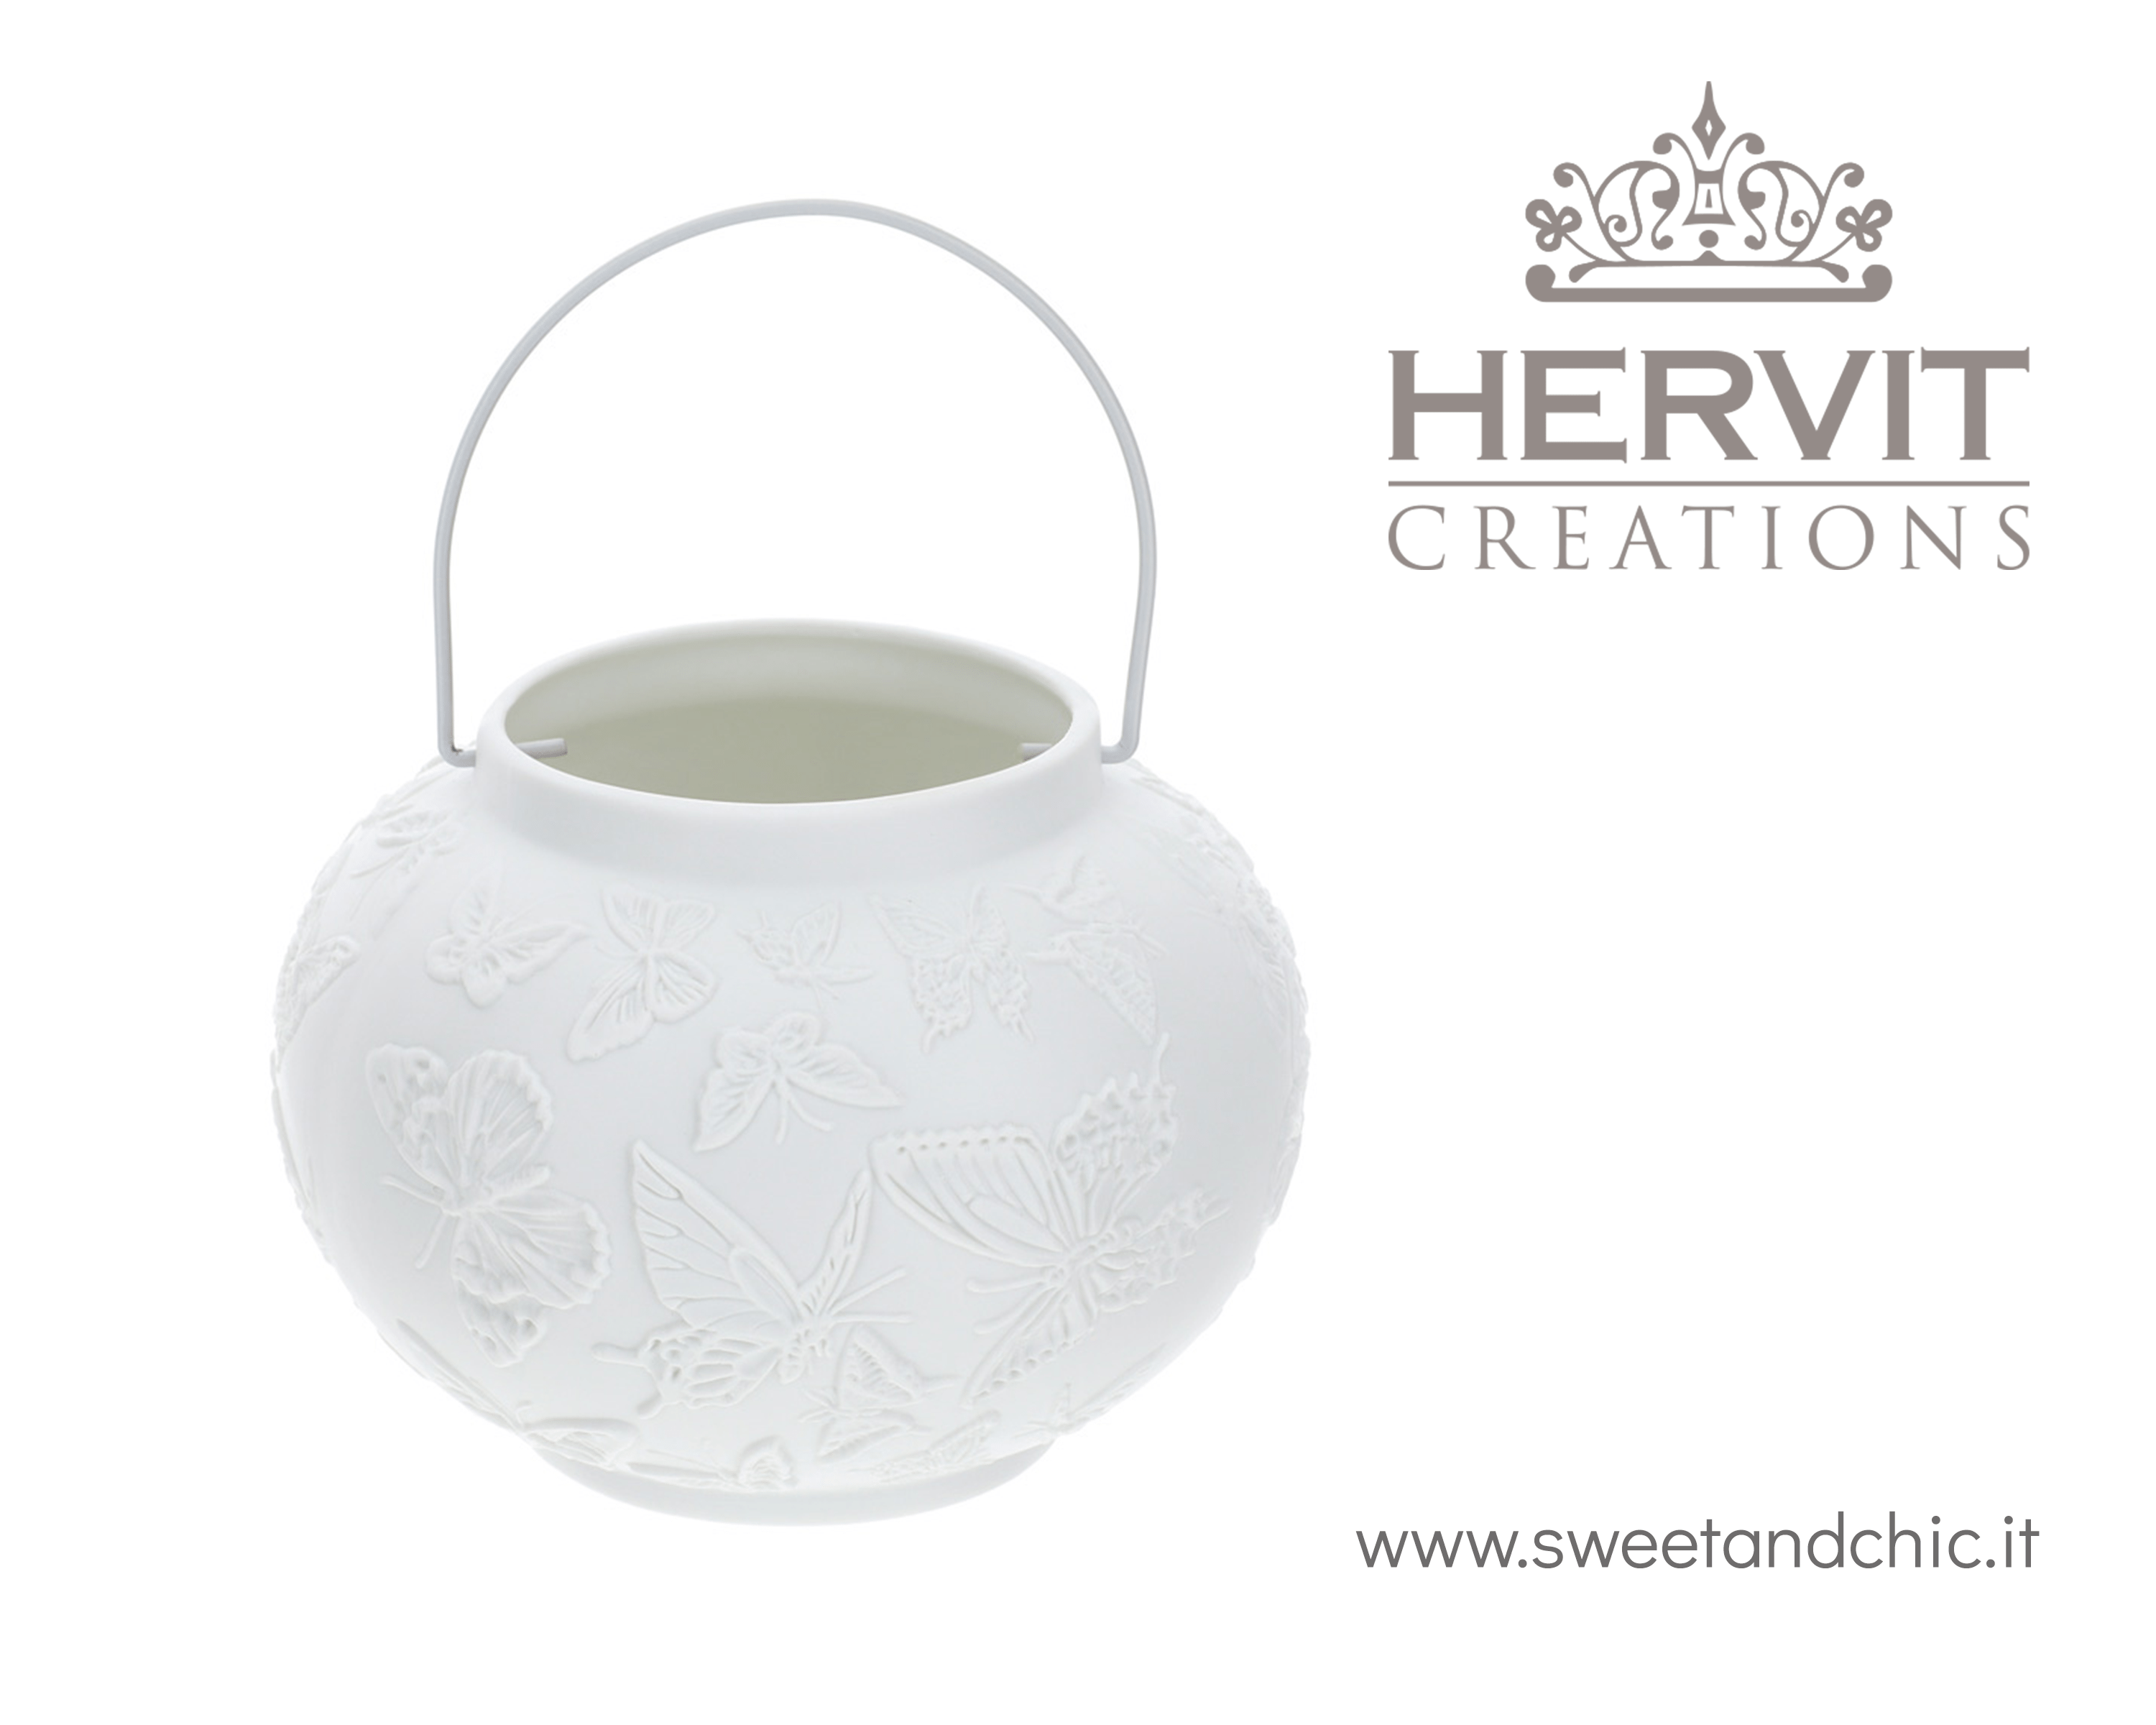 Hervit - Lanterna in porcellana bianca Biscuit | Sweet and Chic